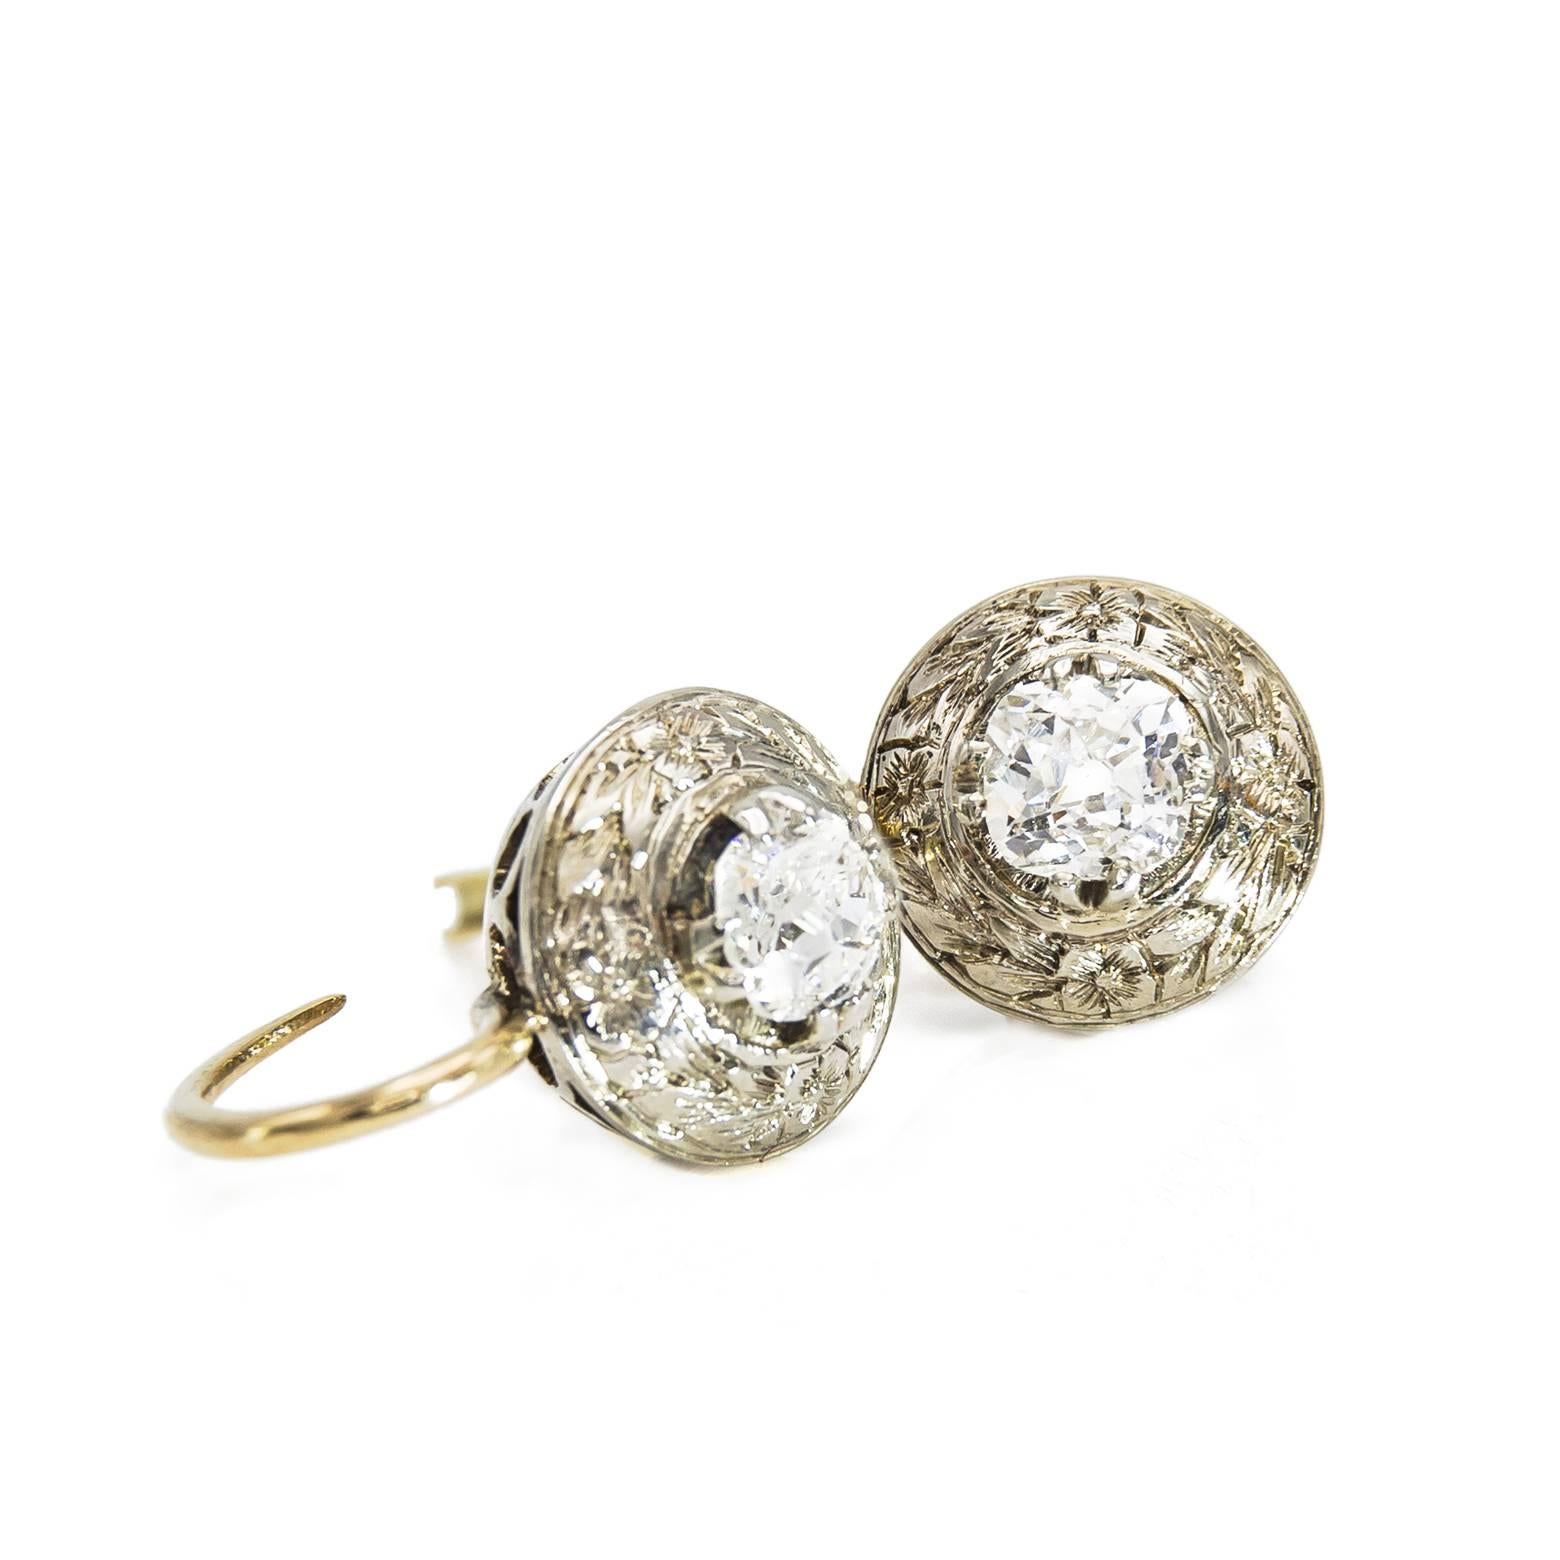 Women's Round Diamond Earrings with a Halo of Engraved White Gold